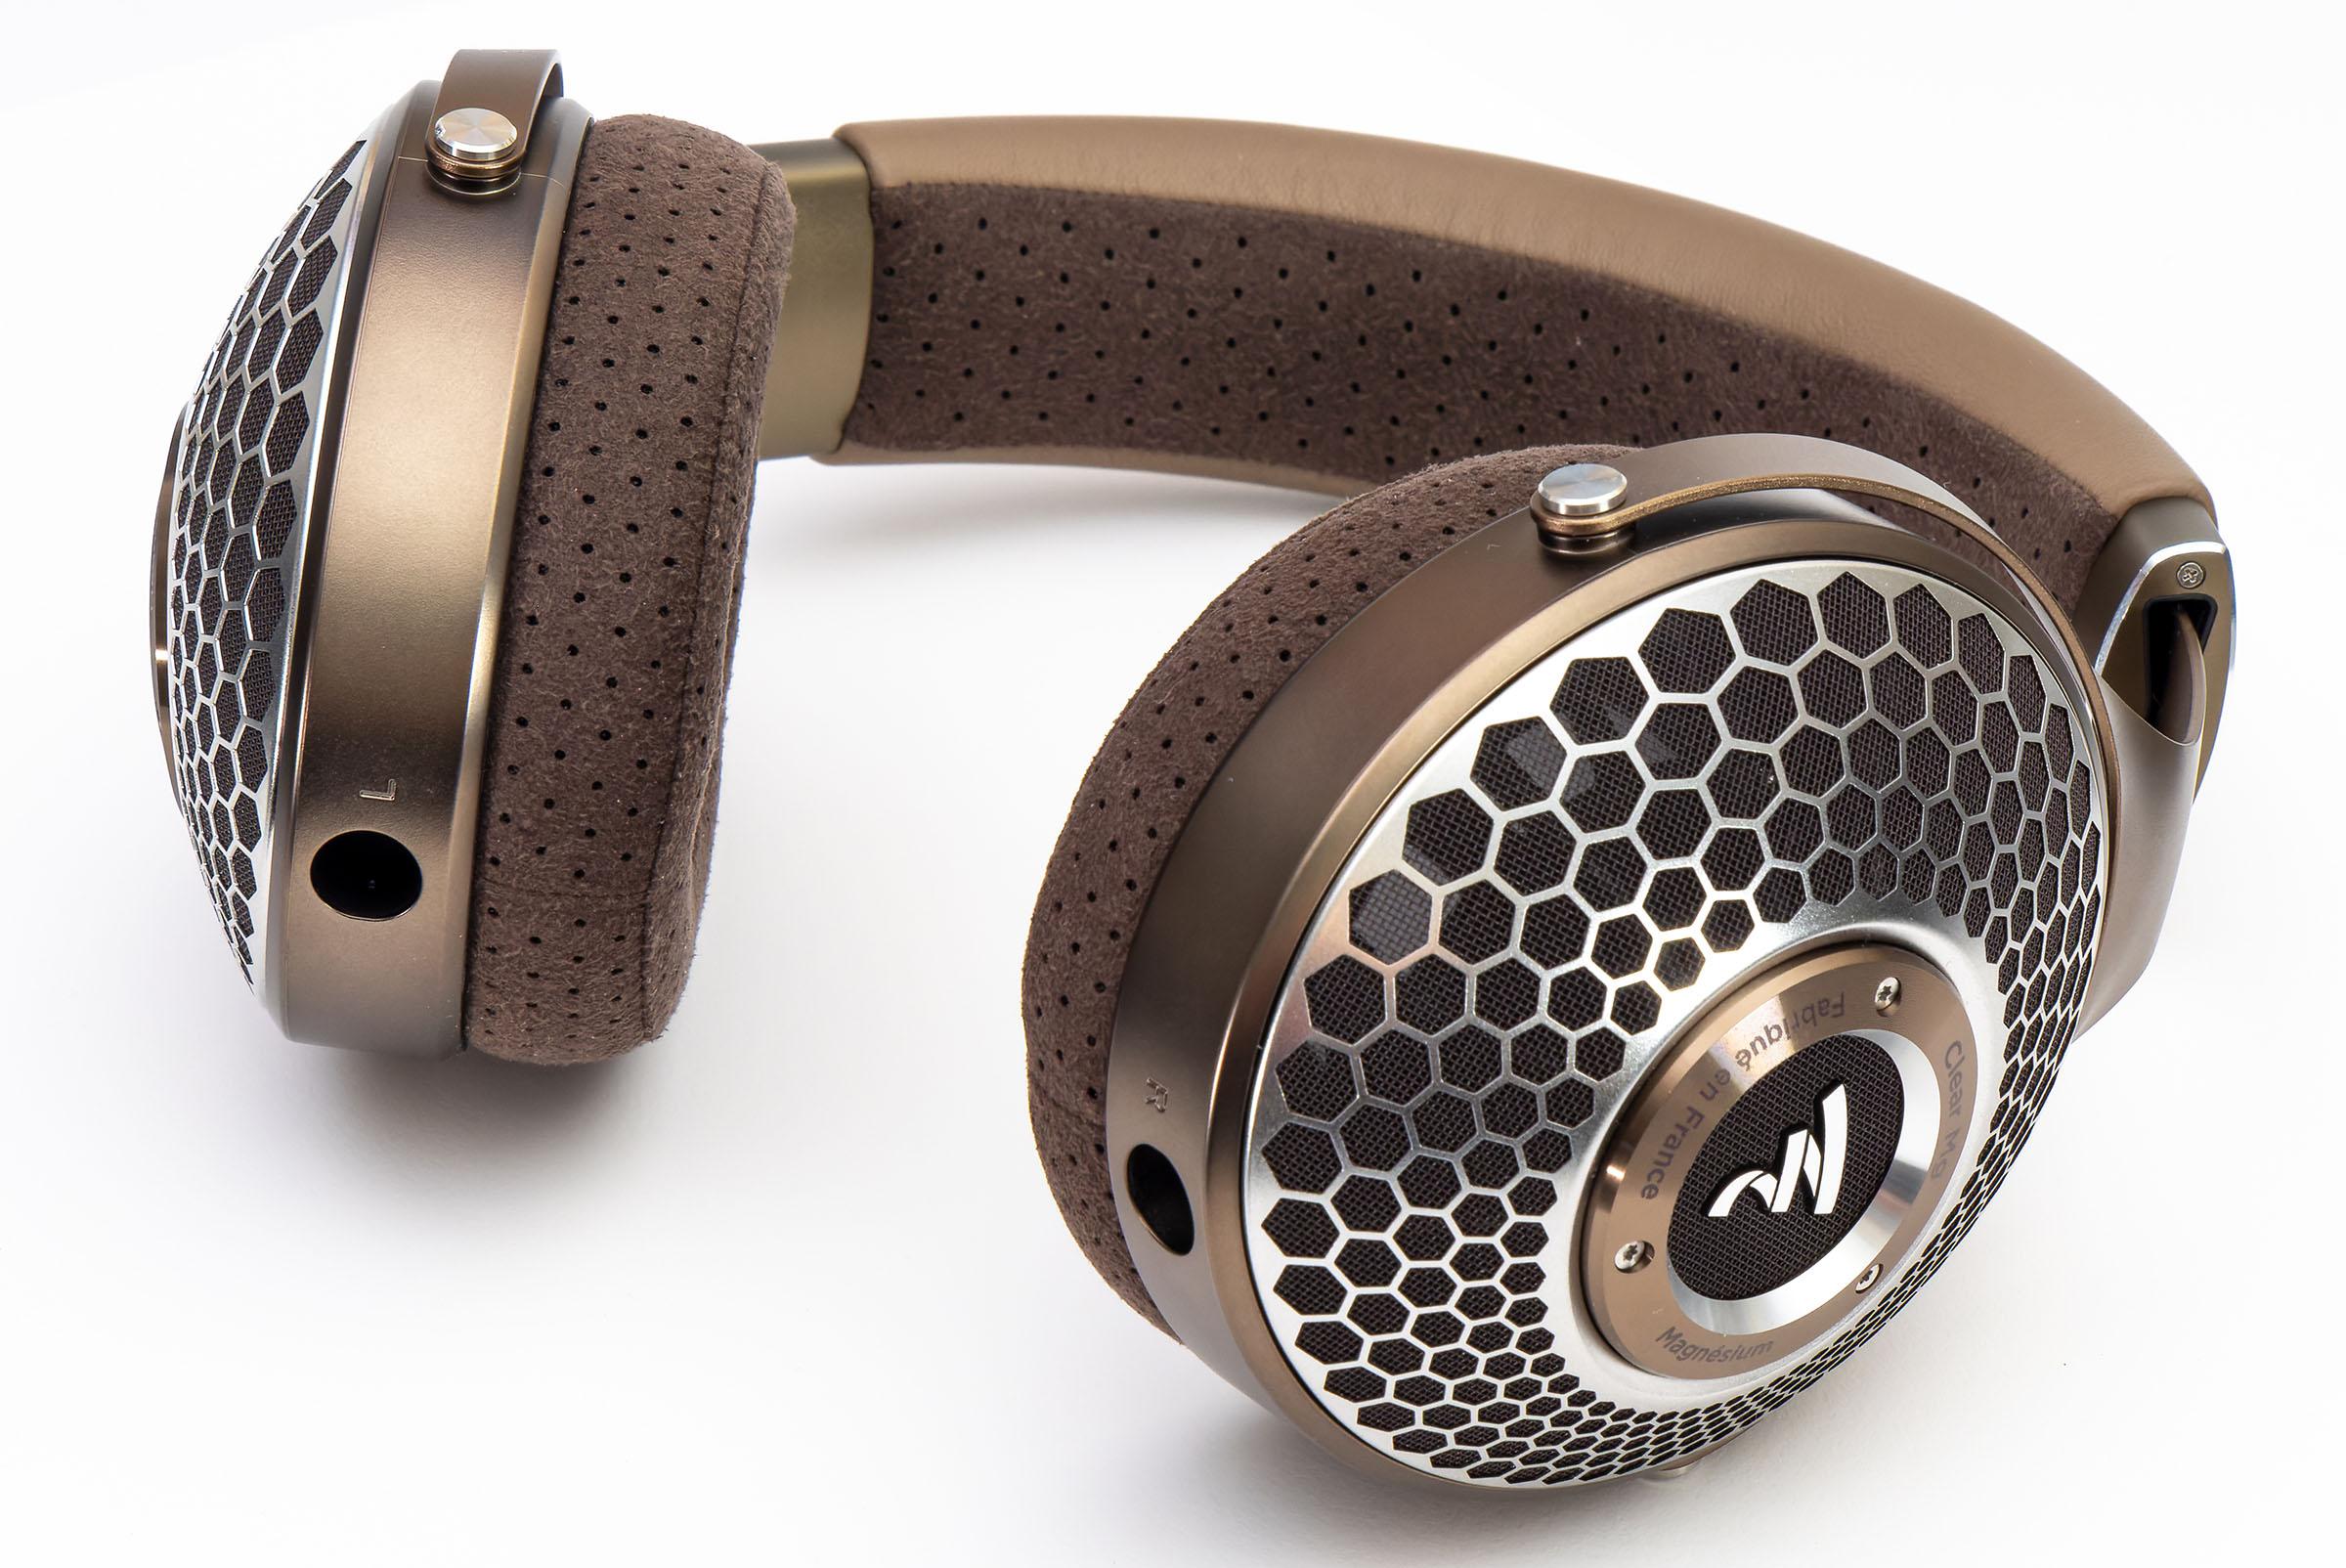 These ultra-high fidelity headphones from Focal are built to an amazingly high standard of fit and finish and are incredibly comfortable, too. b2bd2b9d focal clear mg headphones